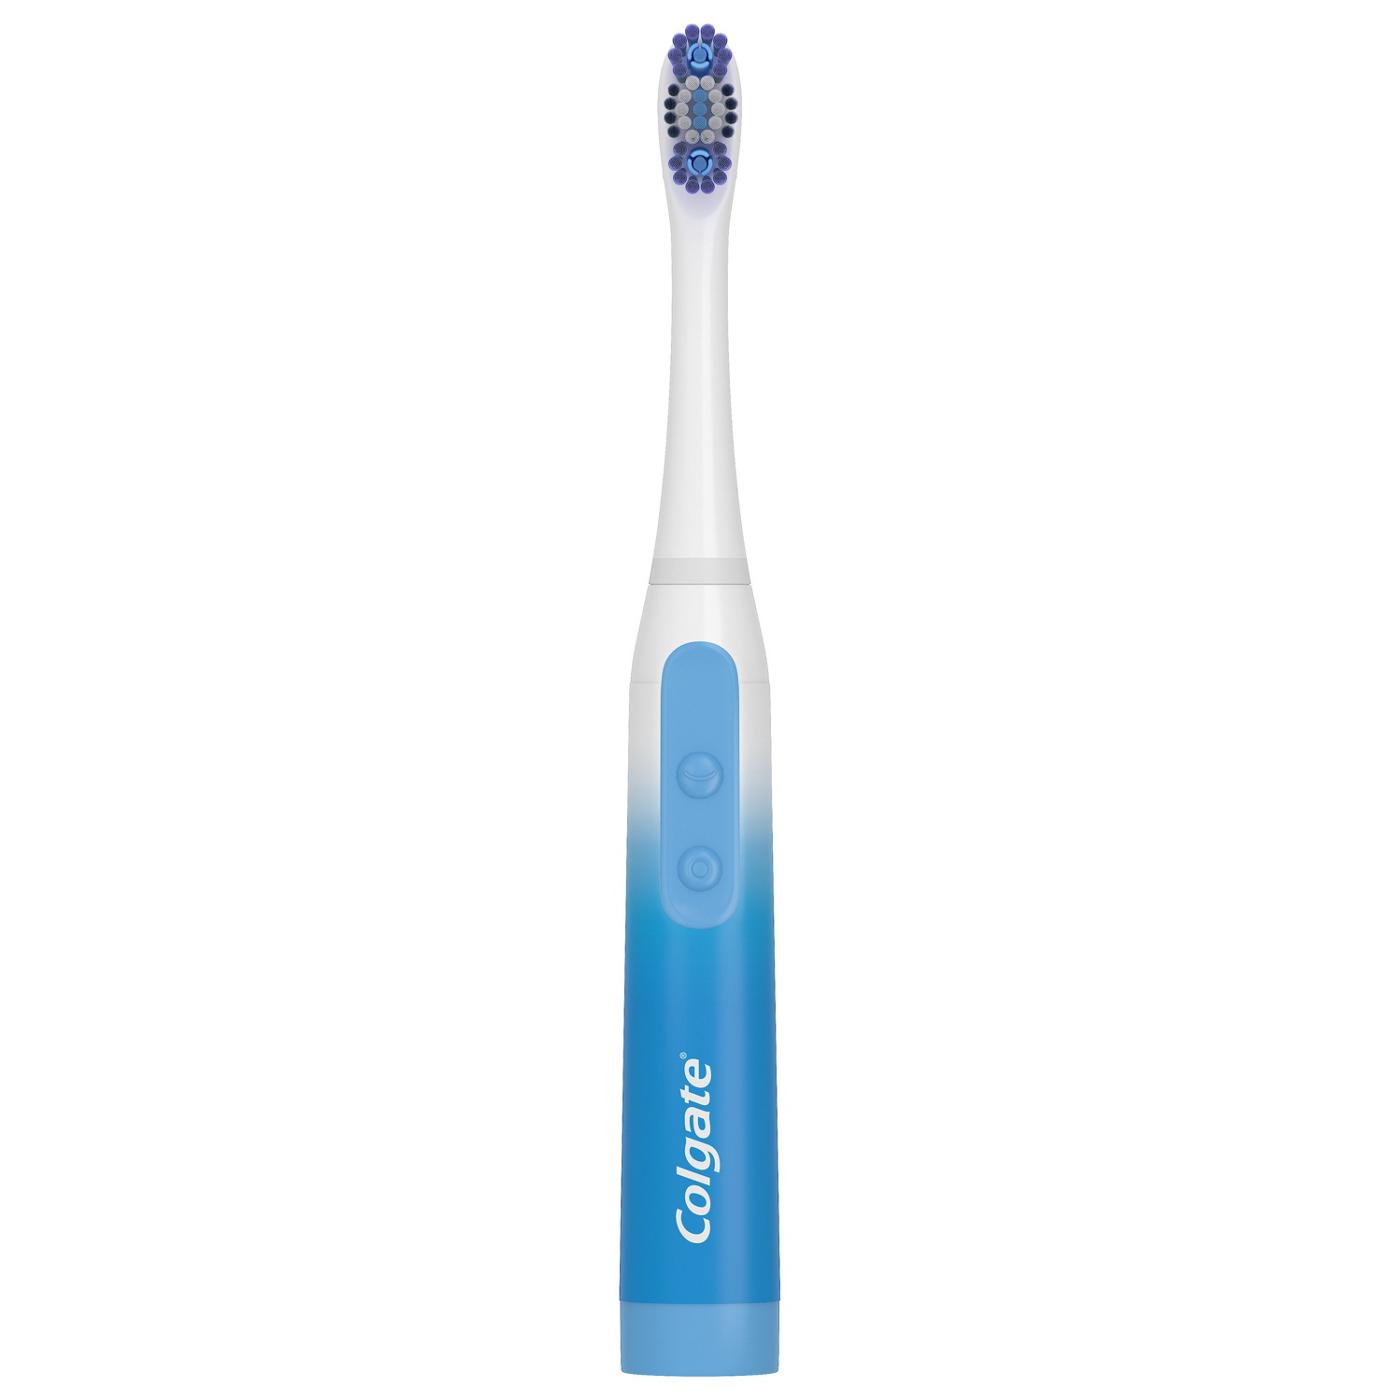 Colgate 360 Total Advanced Floss Tip Soft Powerbrush; image 2 of 8